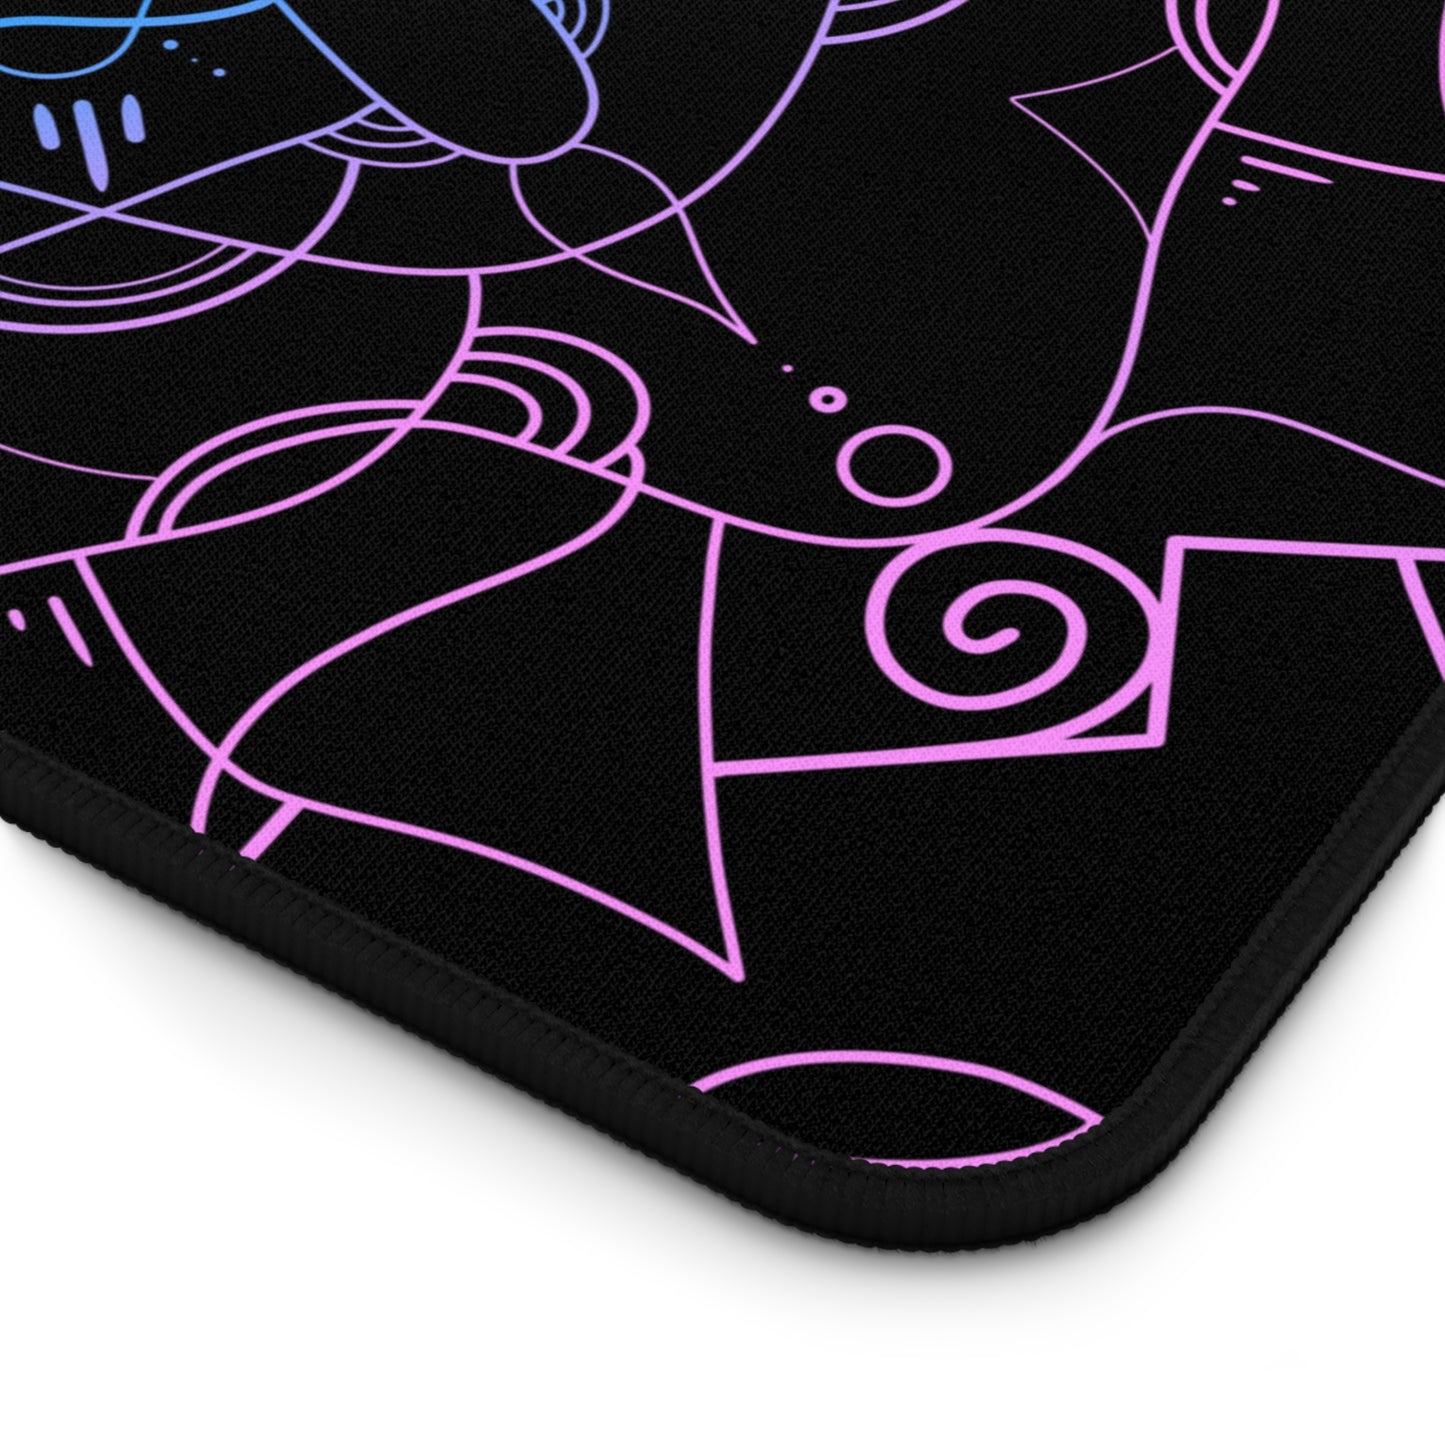 The corner of a 12" x 18" desk mat with a pink and blue mandala pattern on a black background.